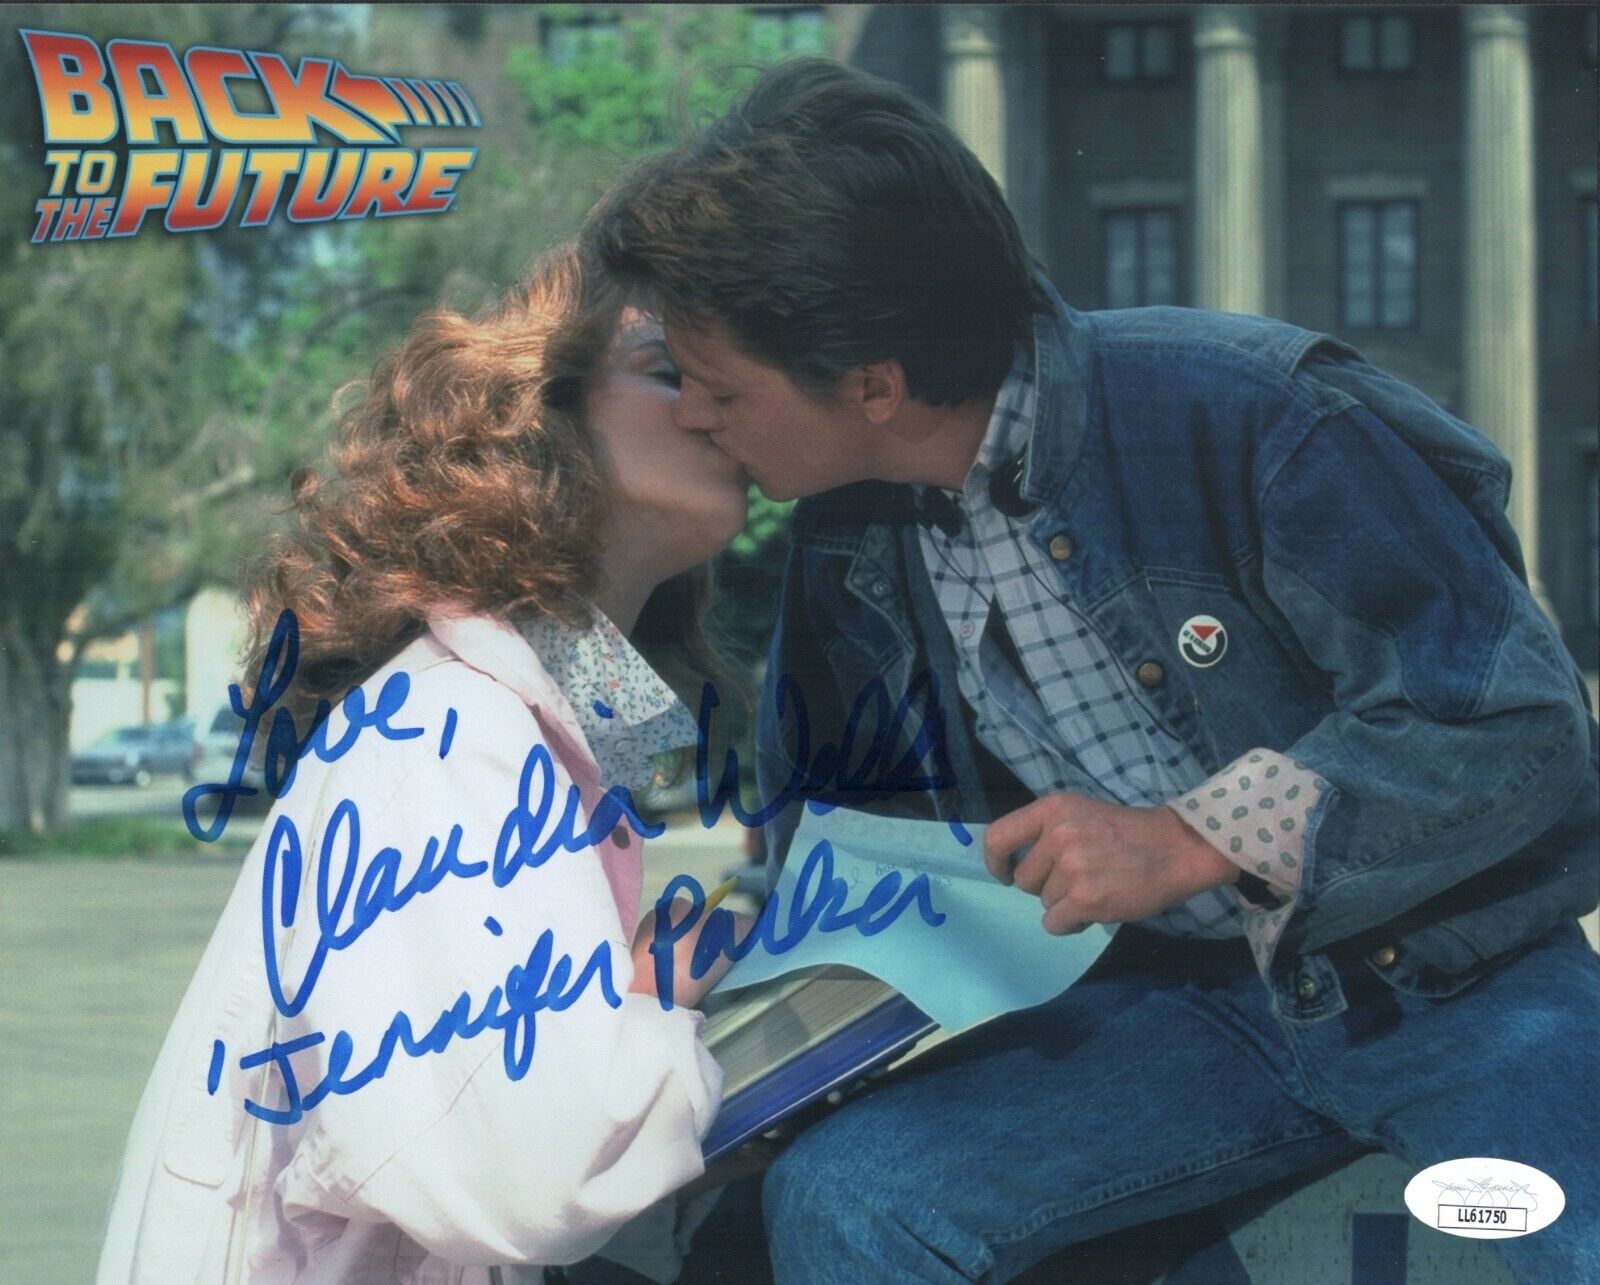 CLAUDIA WELLS Signed 8x10 Photo Poster painting BACK TO THE FUTURE Autograph JSA COA Cert